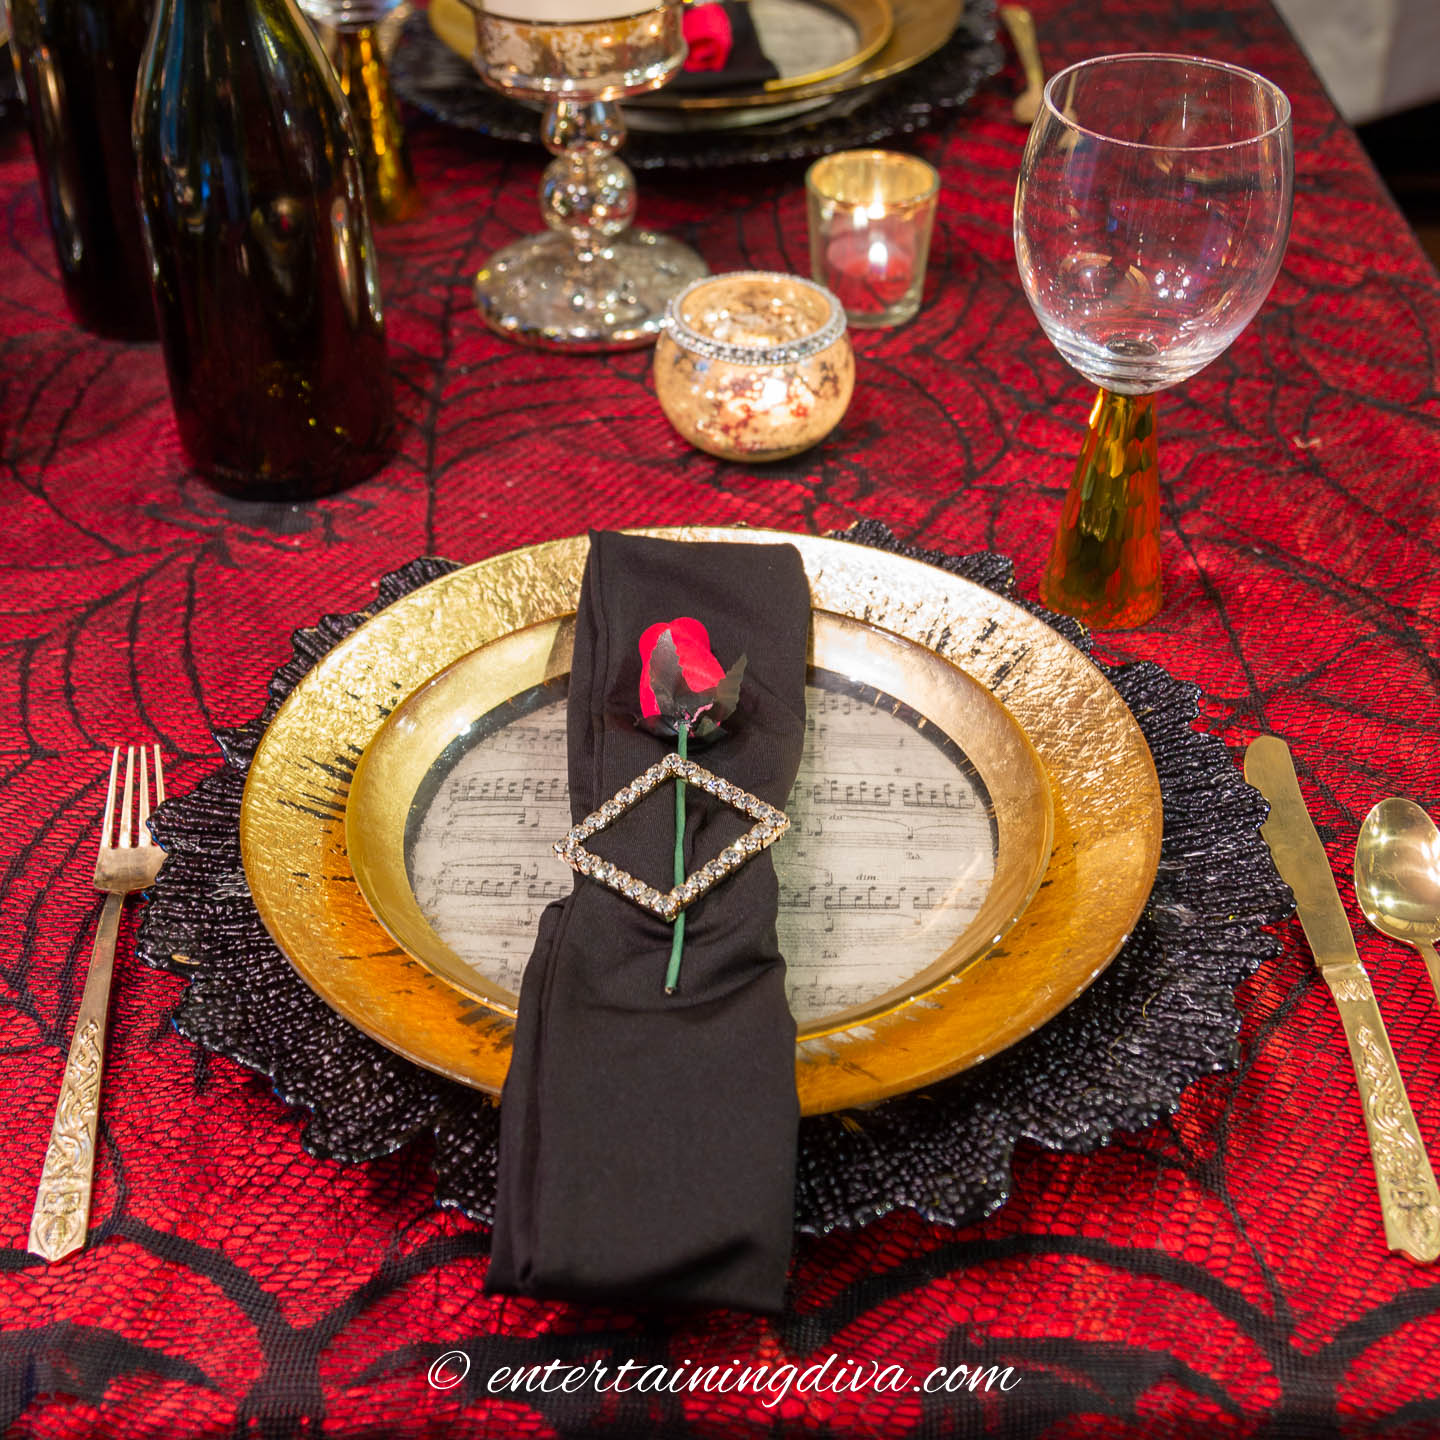 Phantom of the opera party table setting